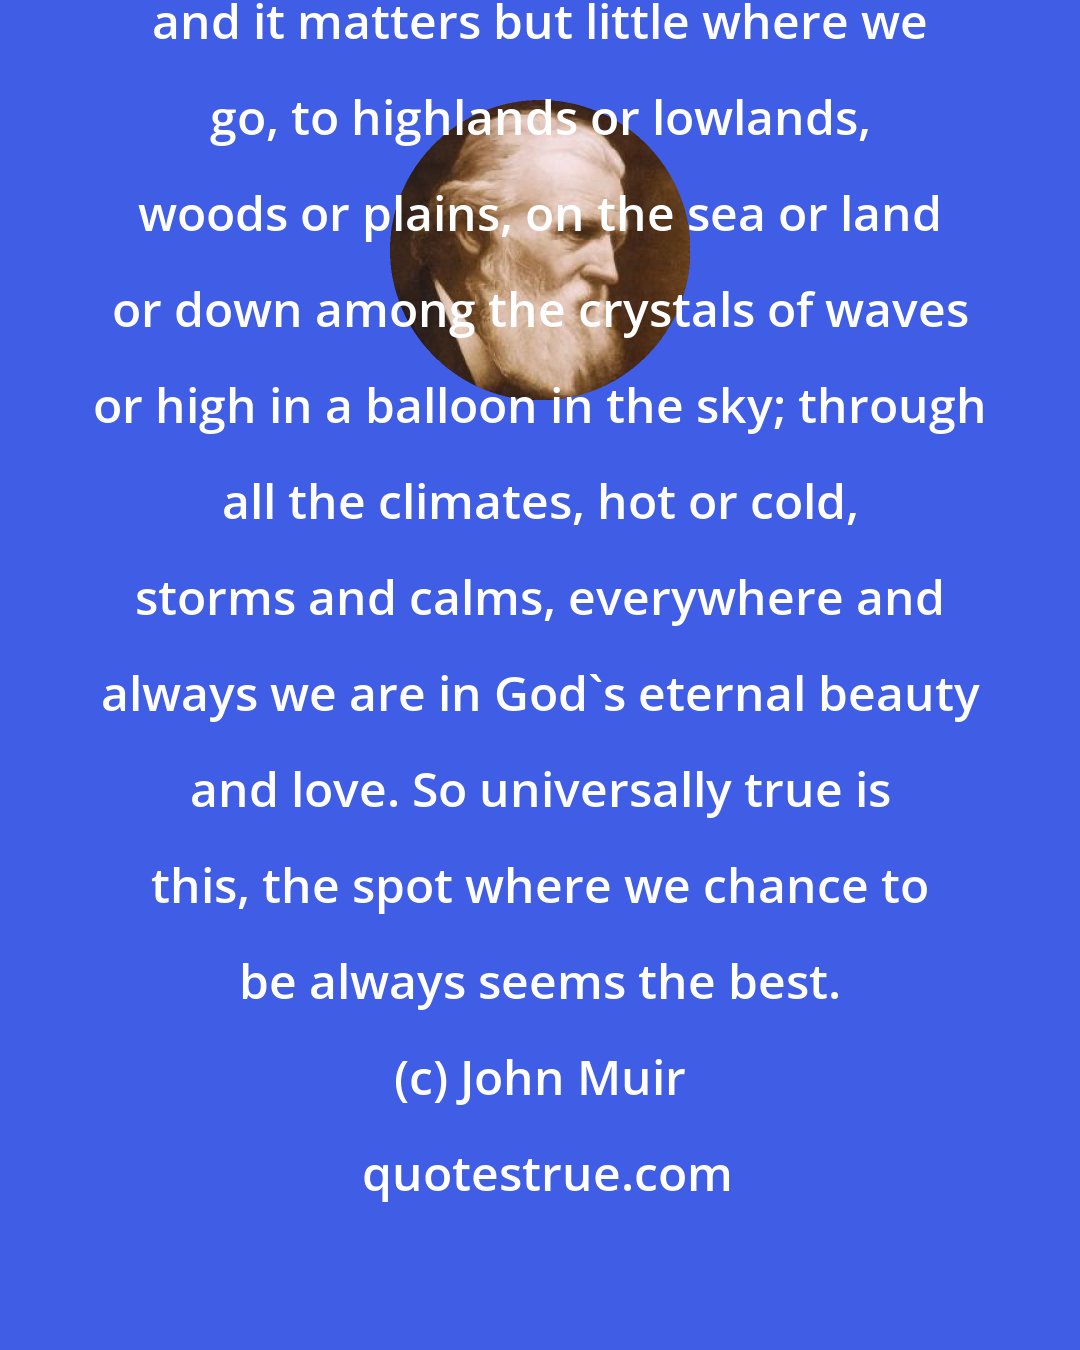 John Muir: All the wild world is beautiful, and it matters but little where we go, to highlands or lowlands, woods or plains, on the sea or land or down among the crystals of waves or high in a balloon in the sky; through all the climates, hot or cold, storms and calms, everywhere and always we are in God's eternal beauty and love. So universally true is this, the spot where we chance to be always seems the best.